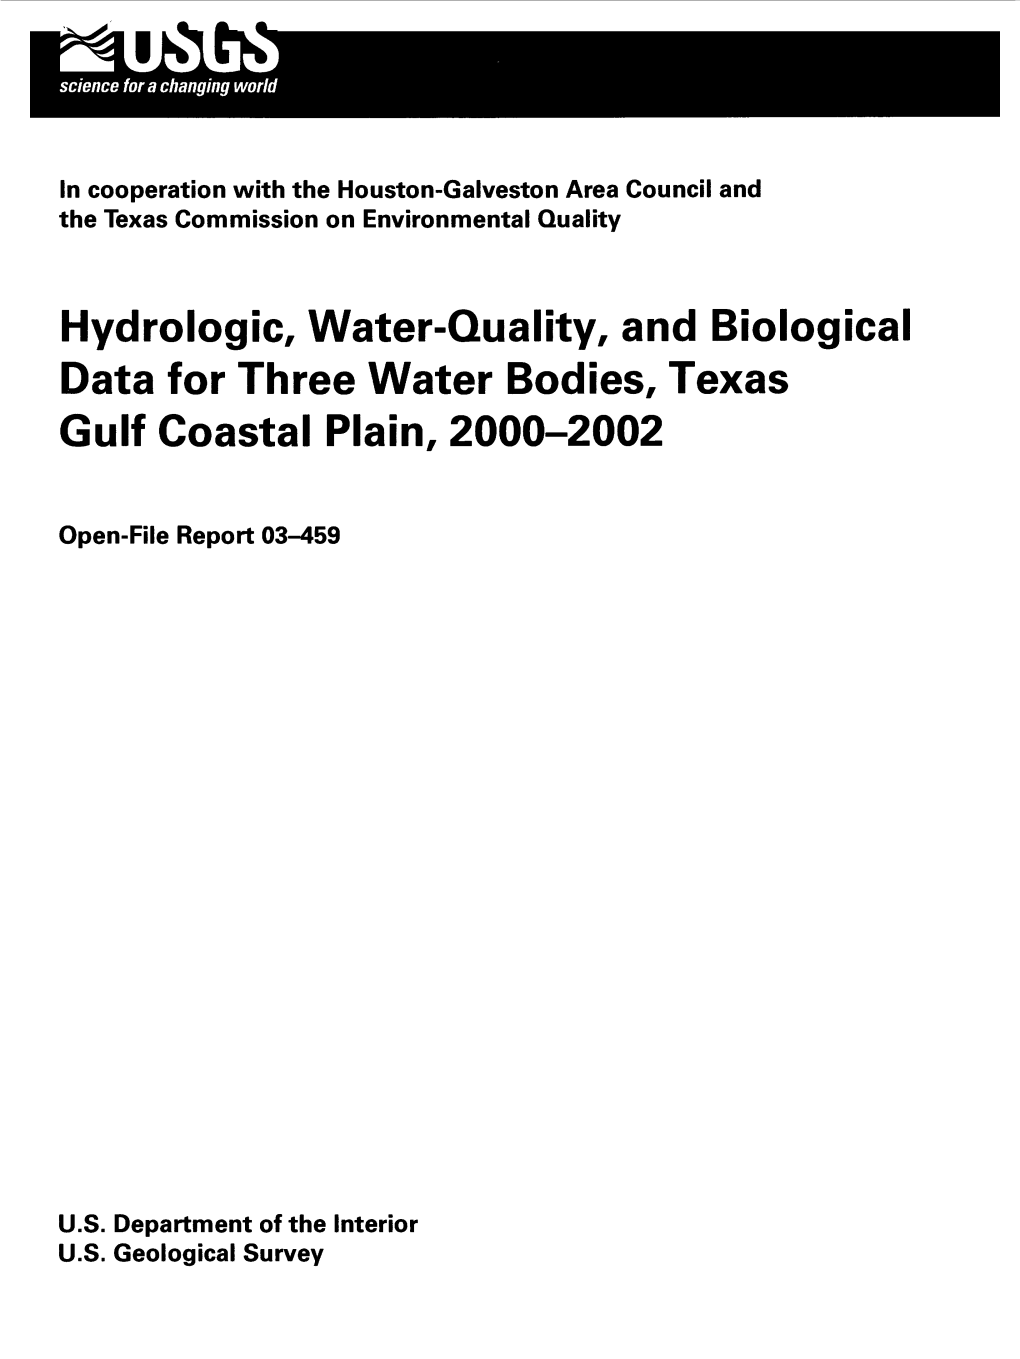 Hydrologic, Water-Quality, and Biological Data for Three Water Bodies, Texas Gulf Coastal Plain, 2000-2002